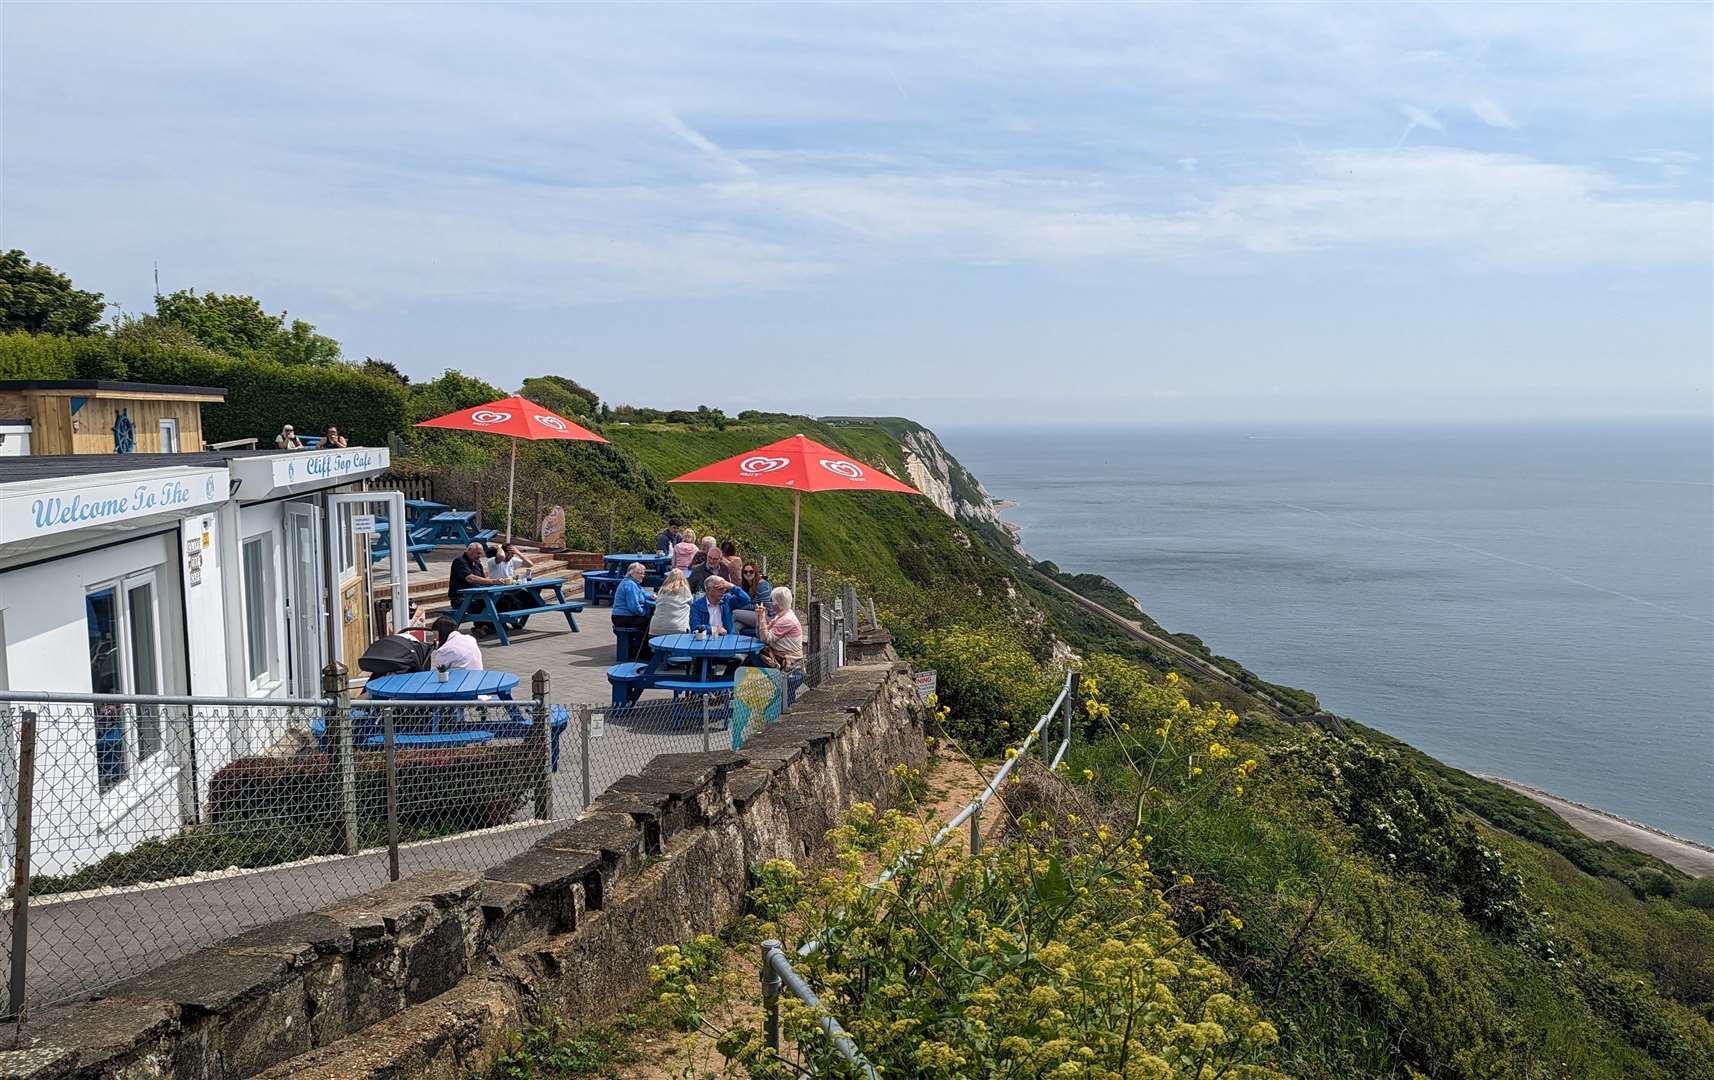 The Clifftop Cafe at Capel-le-Ferne provides a good place to stop and refuel